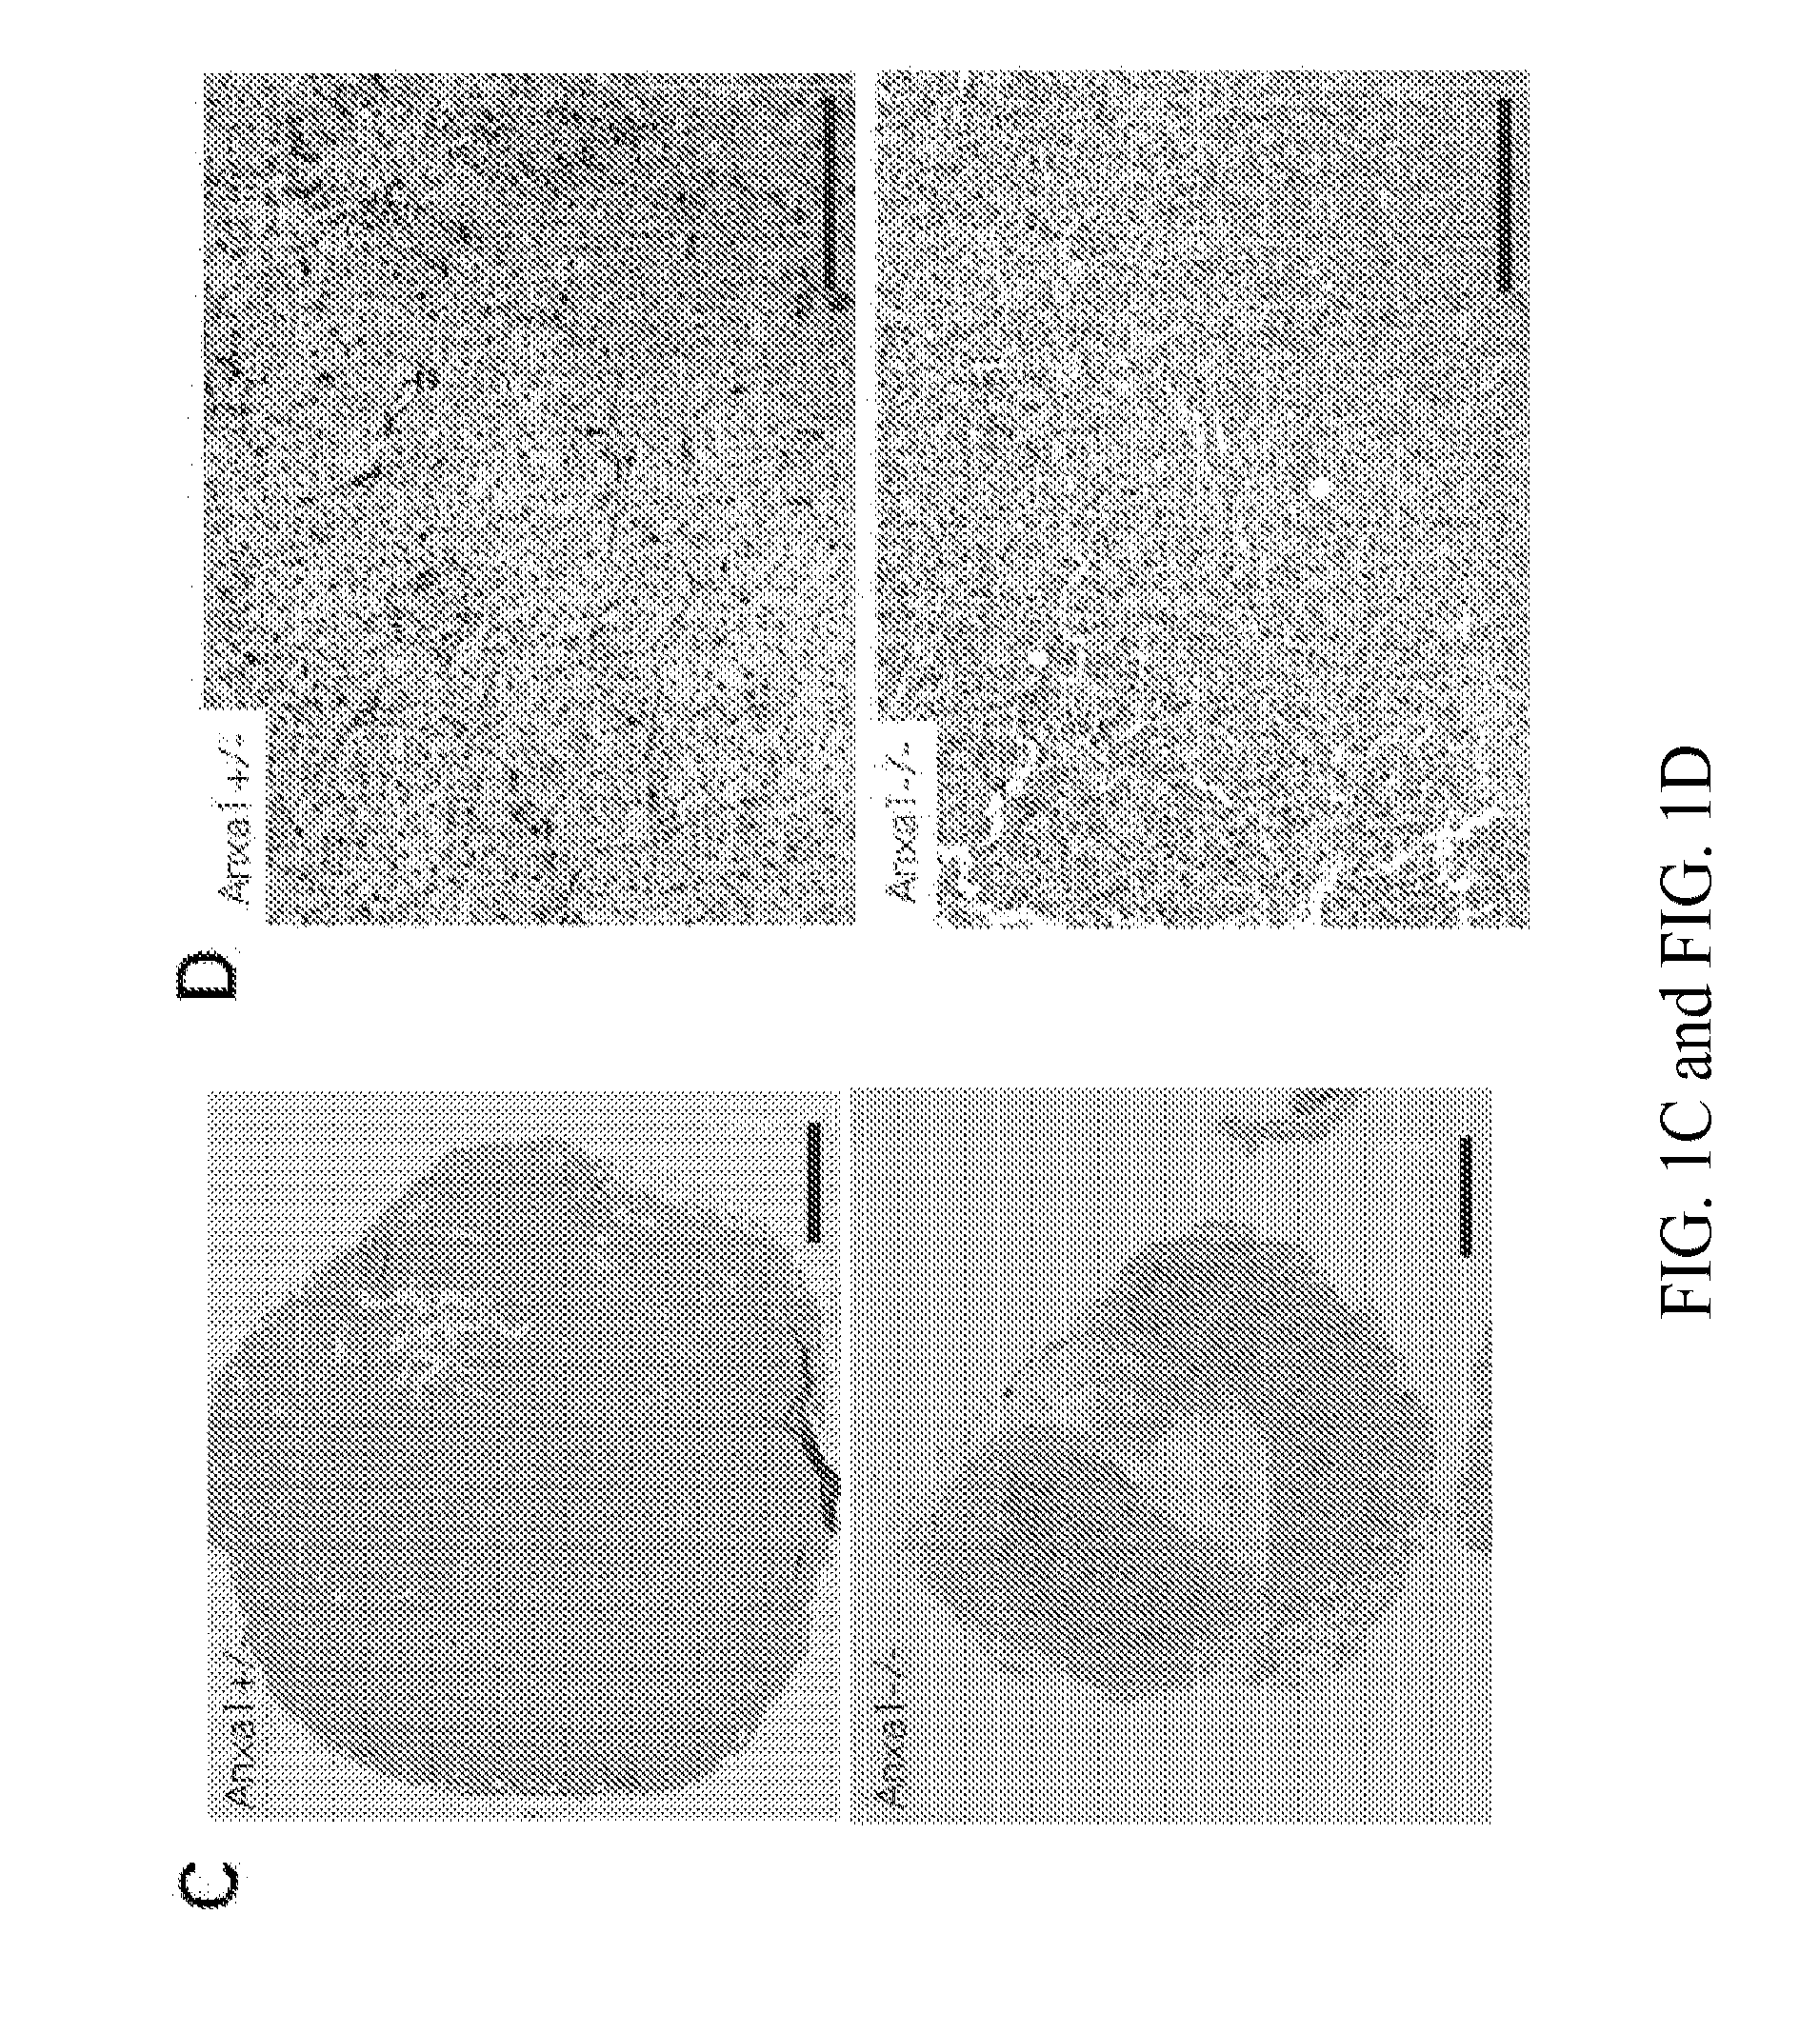 Methods and Compositions Related to Annexin 1-Binding Compounds